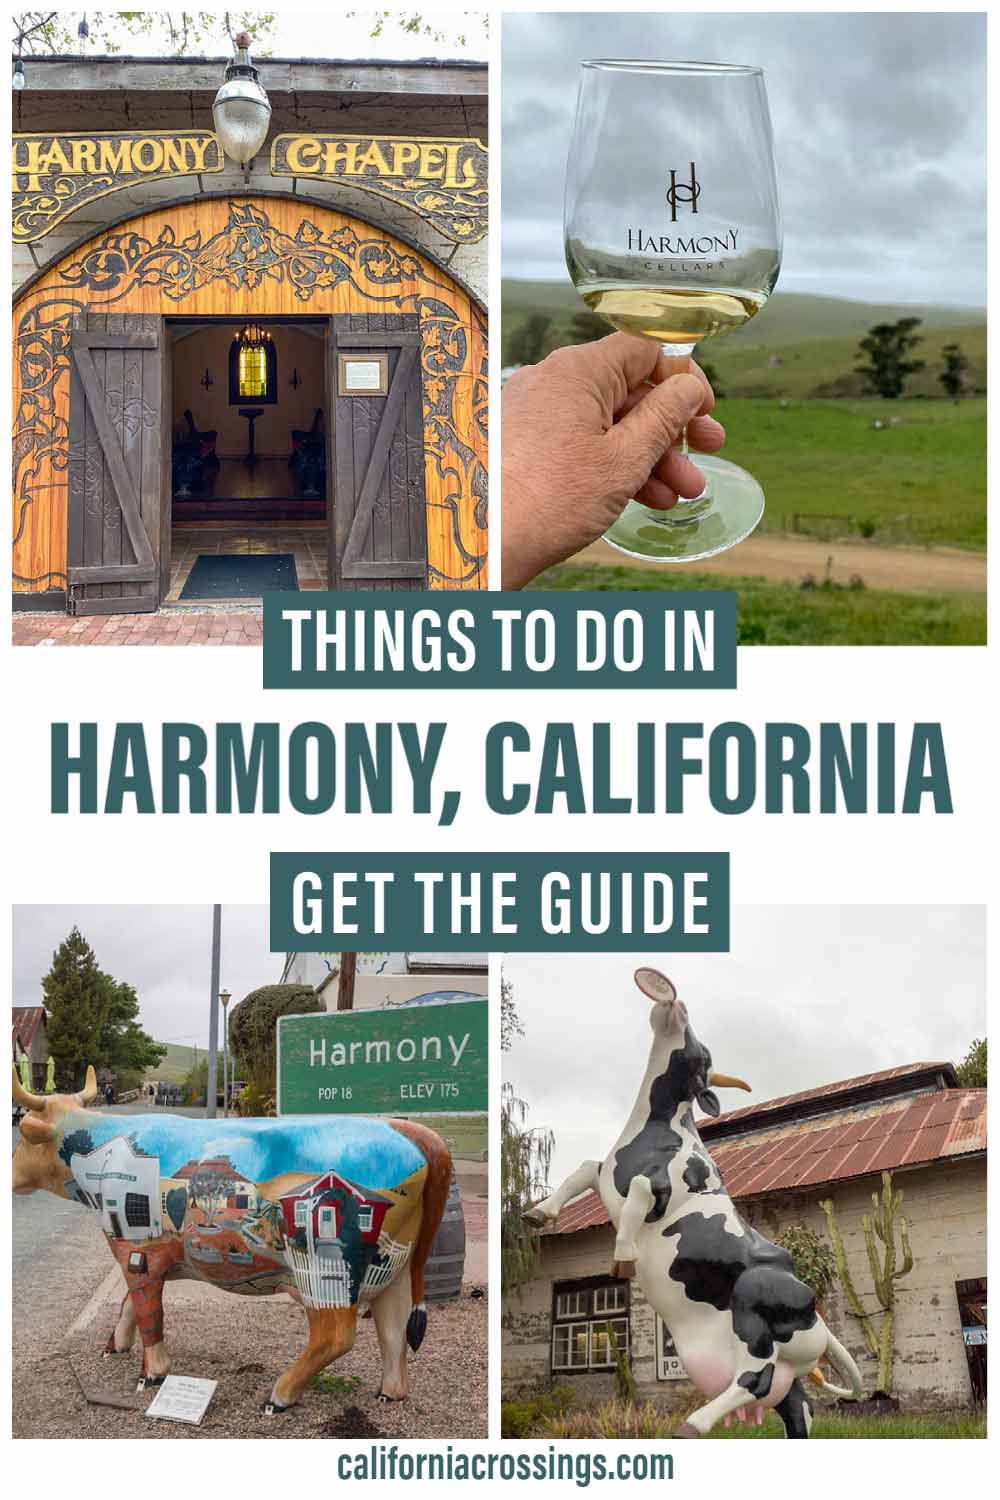 Things to do in Harmony California guide